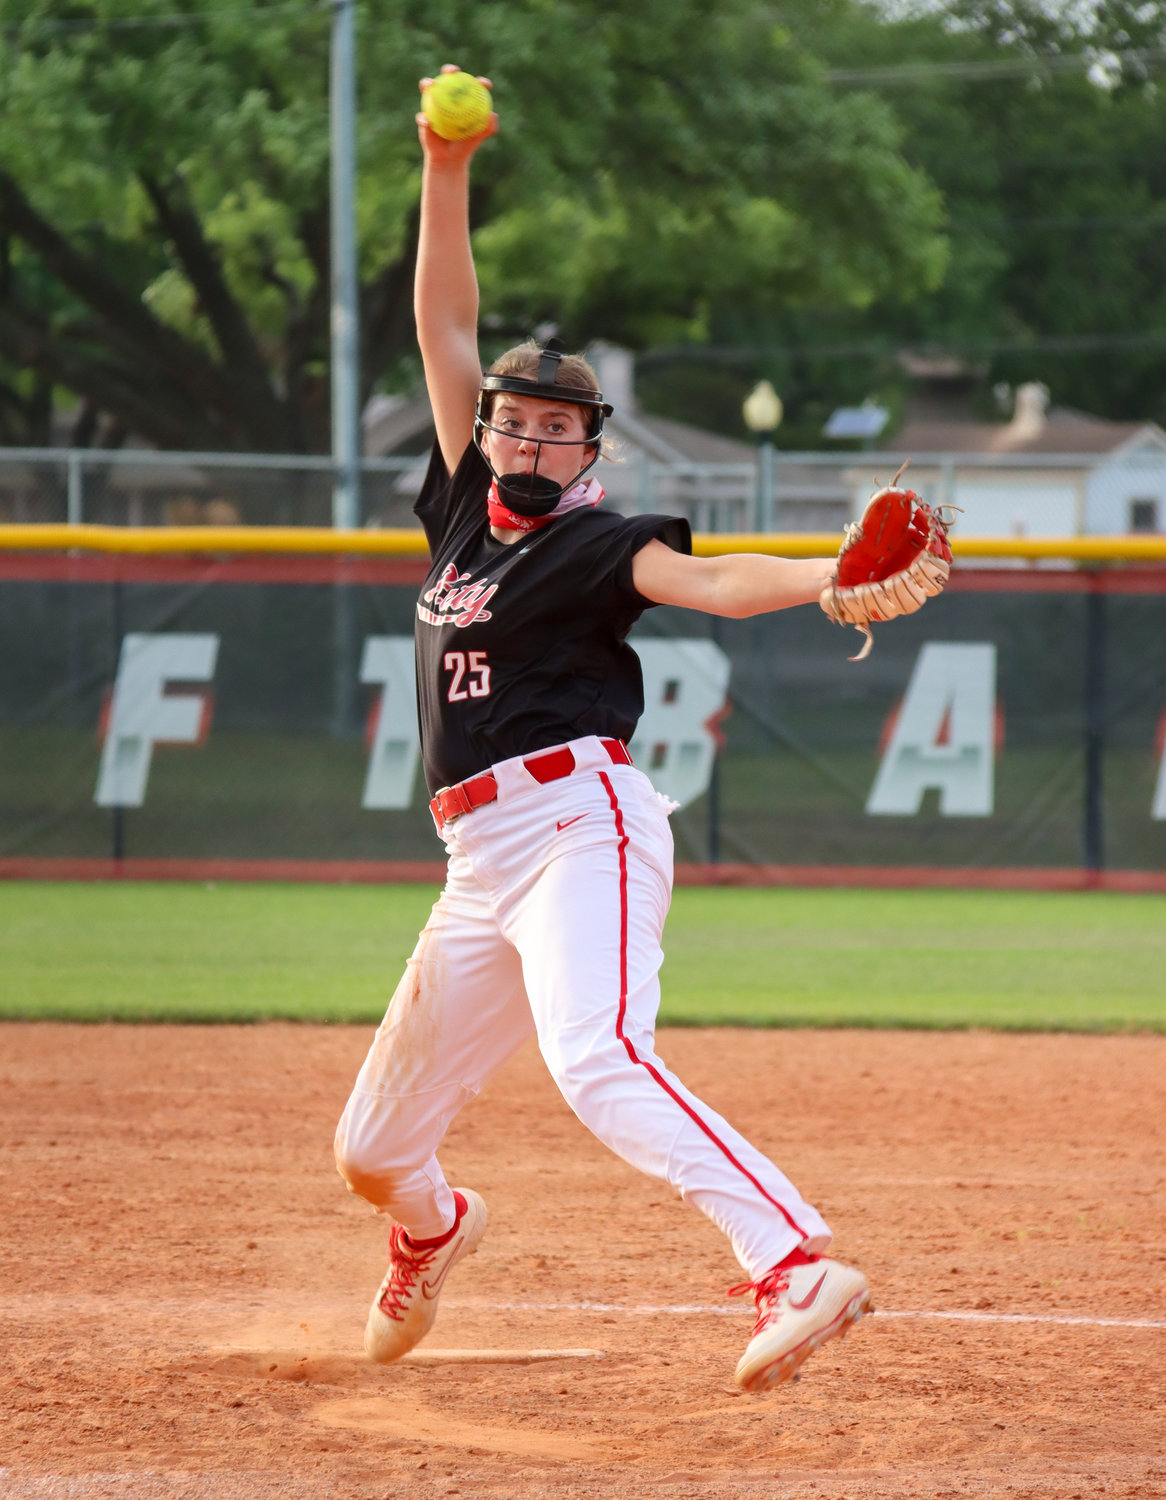 Katy High sophomore Cameryn Harrison (25) delivers a pitch during a game against Cinco Ranch last year at Katy High.